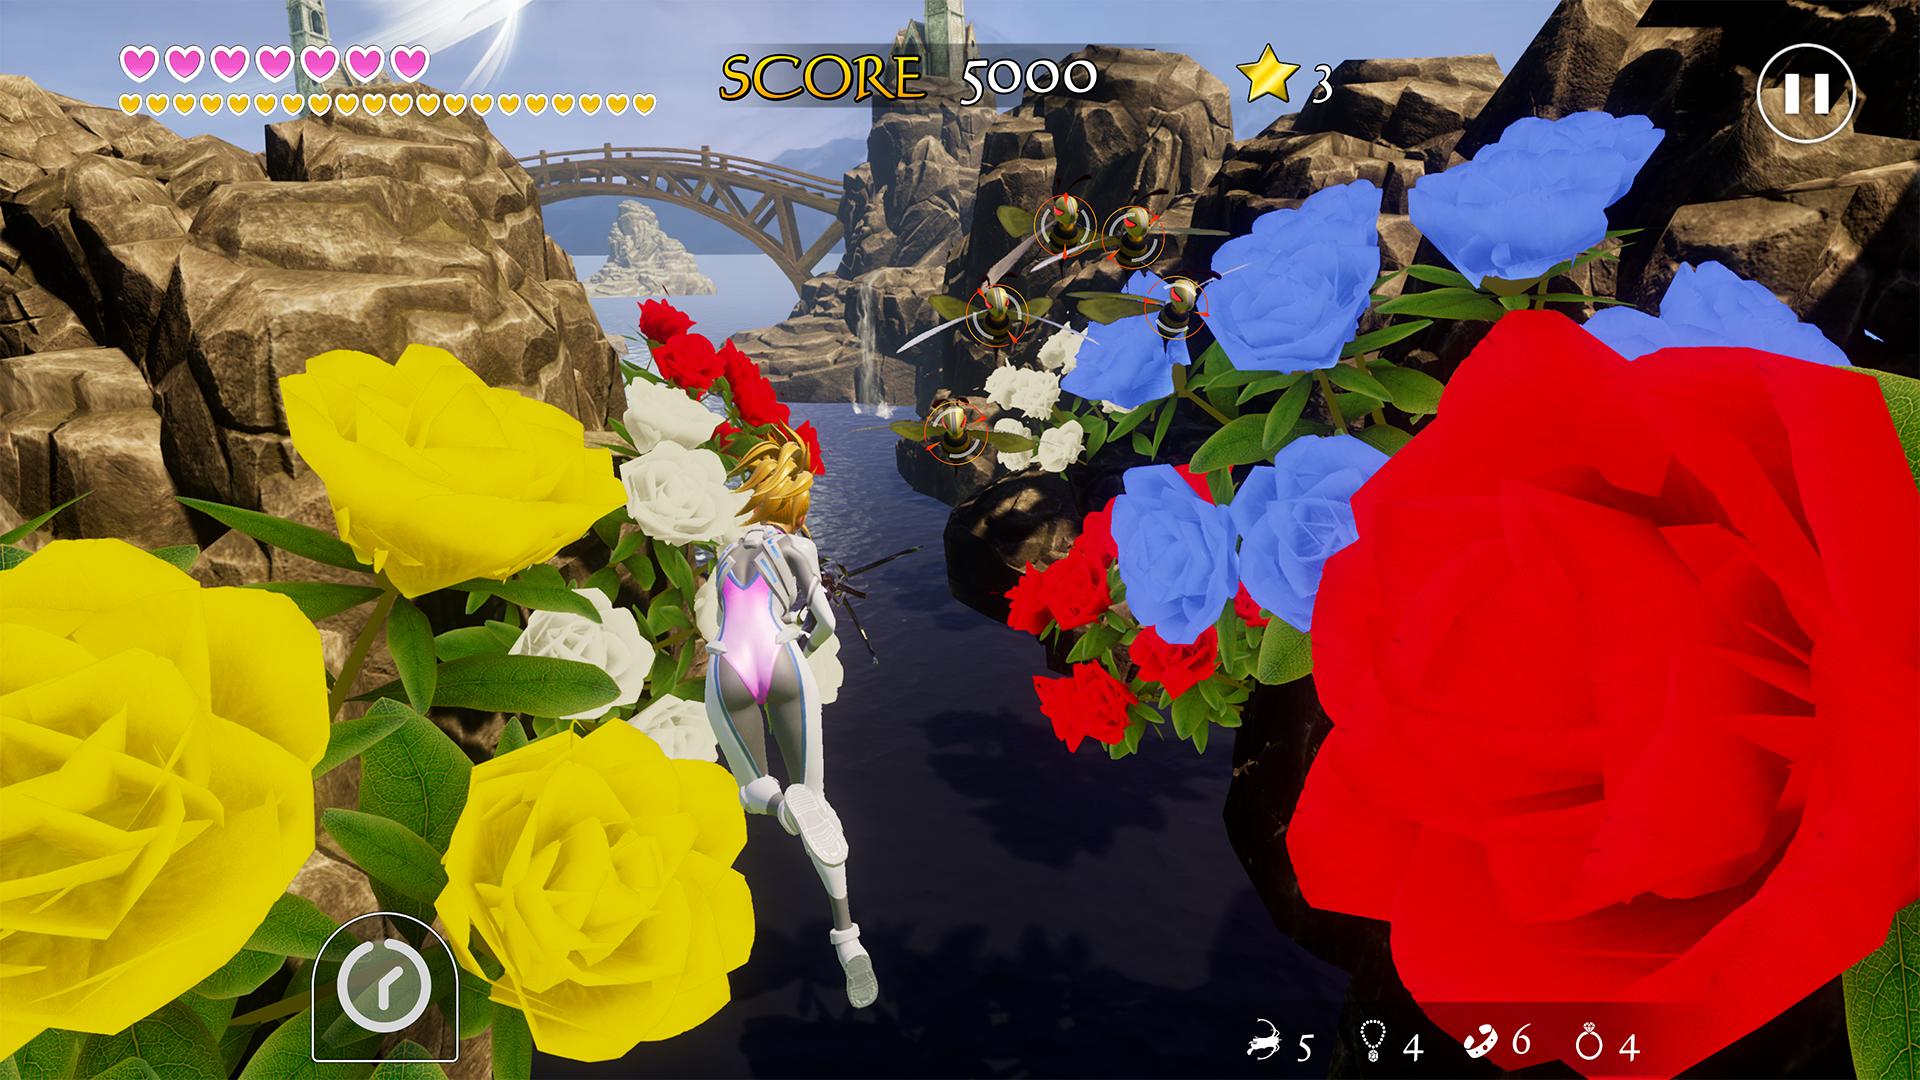 A fairy tale setting in Air Twister, depicting massive, colorful flowers.